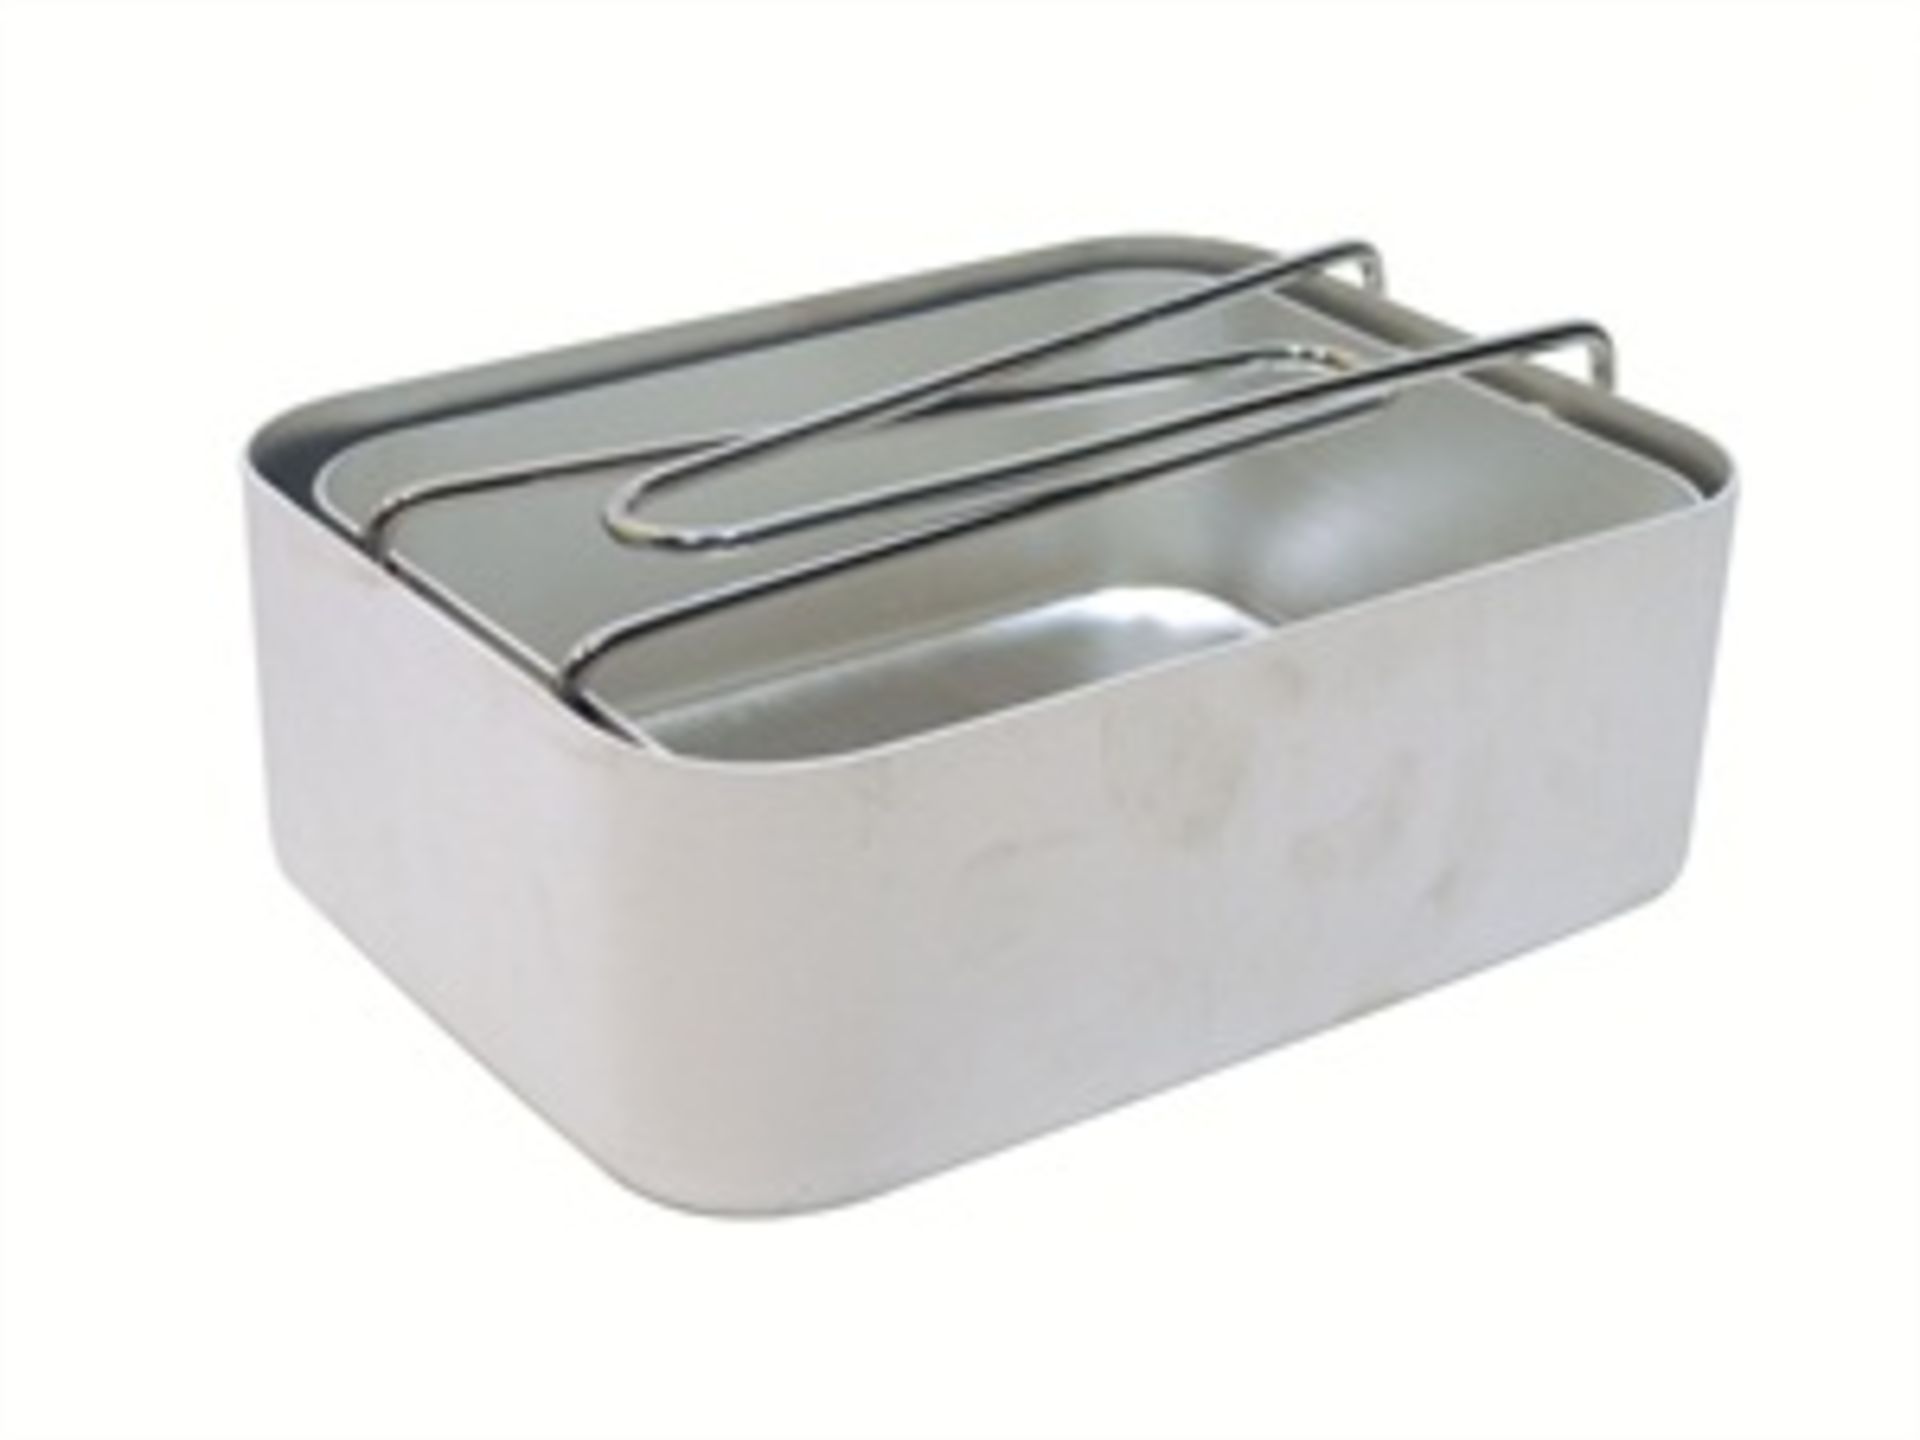 Job Lot of 50 -2 x Genuine Mess Tins These Mess tins are made from durable aluminium to the standard - Image 2 of 2